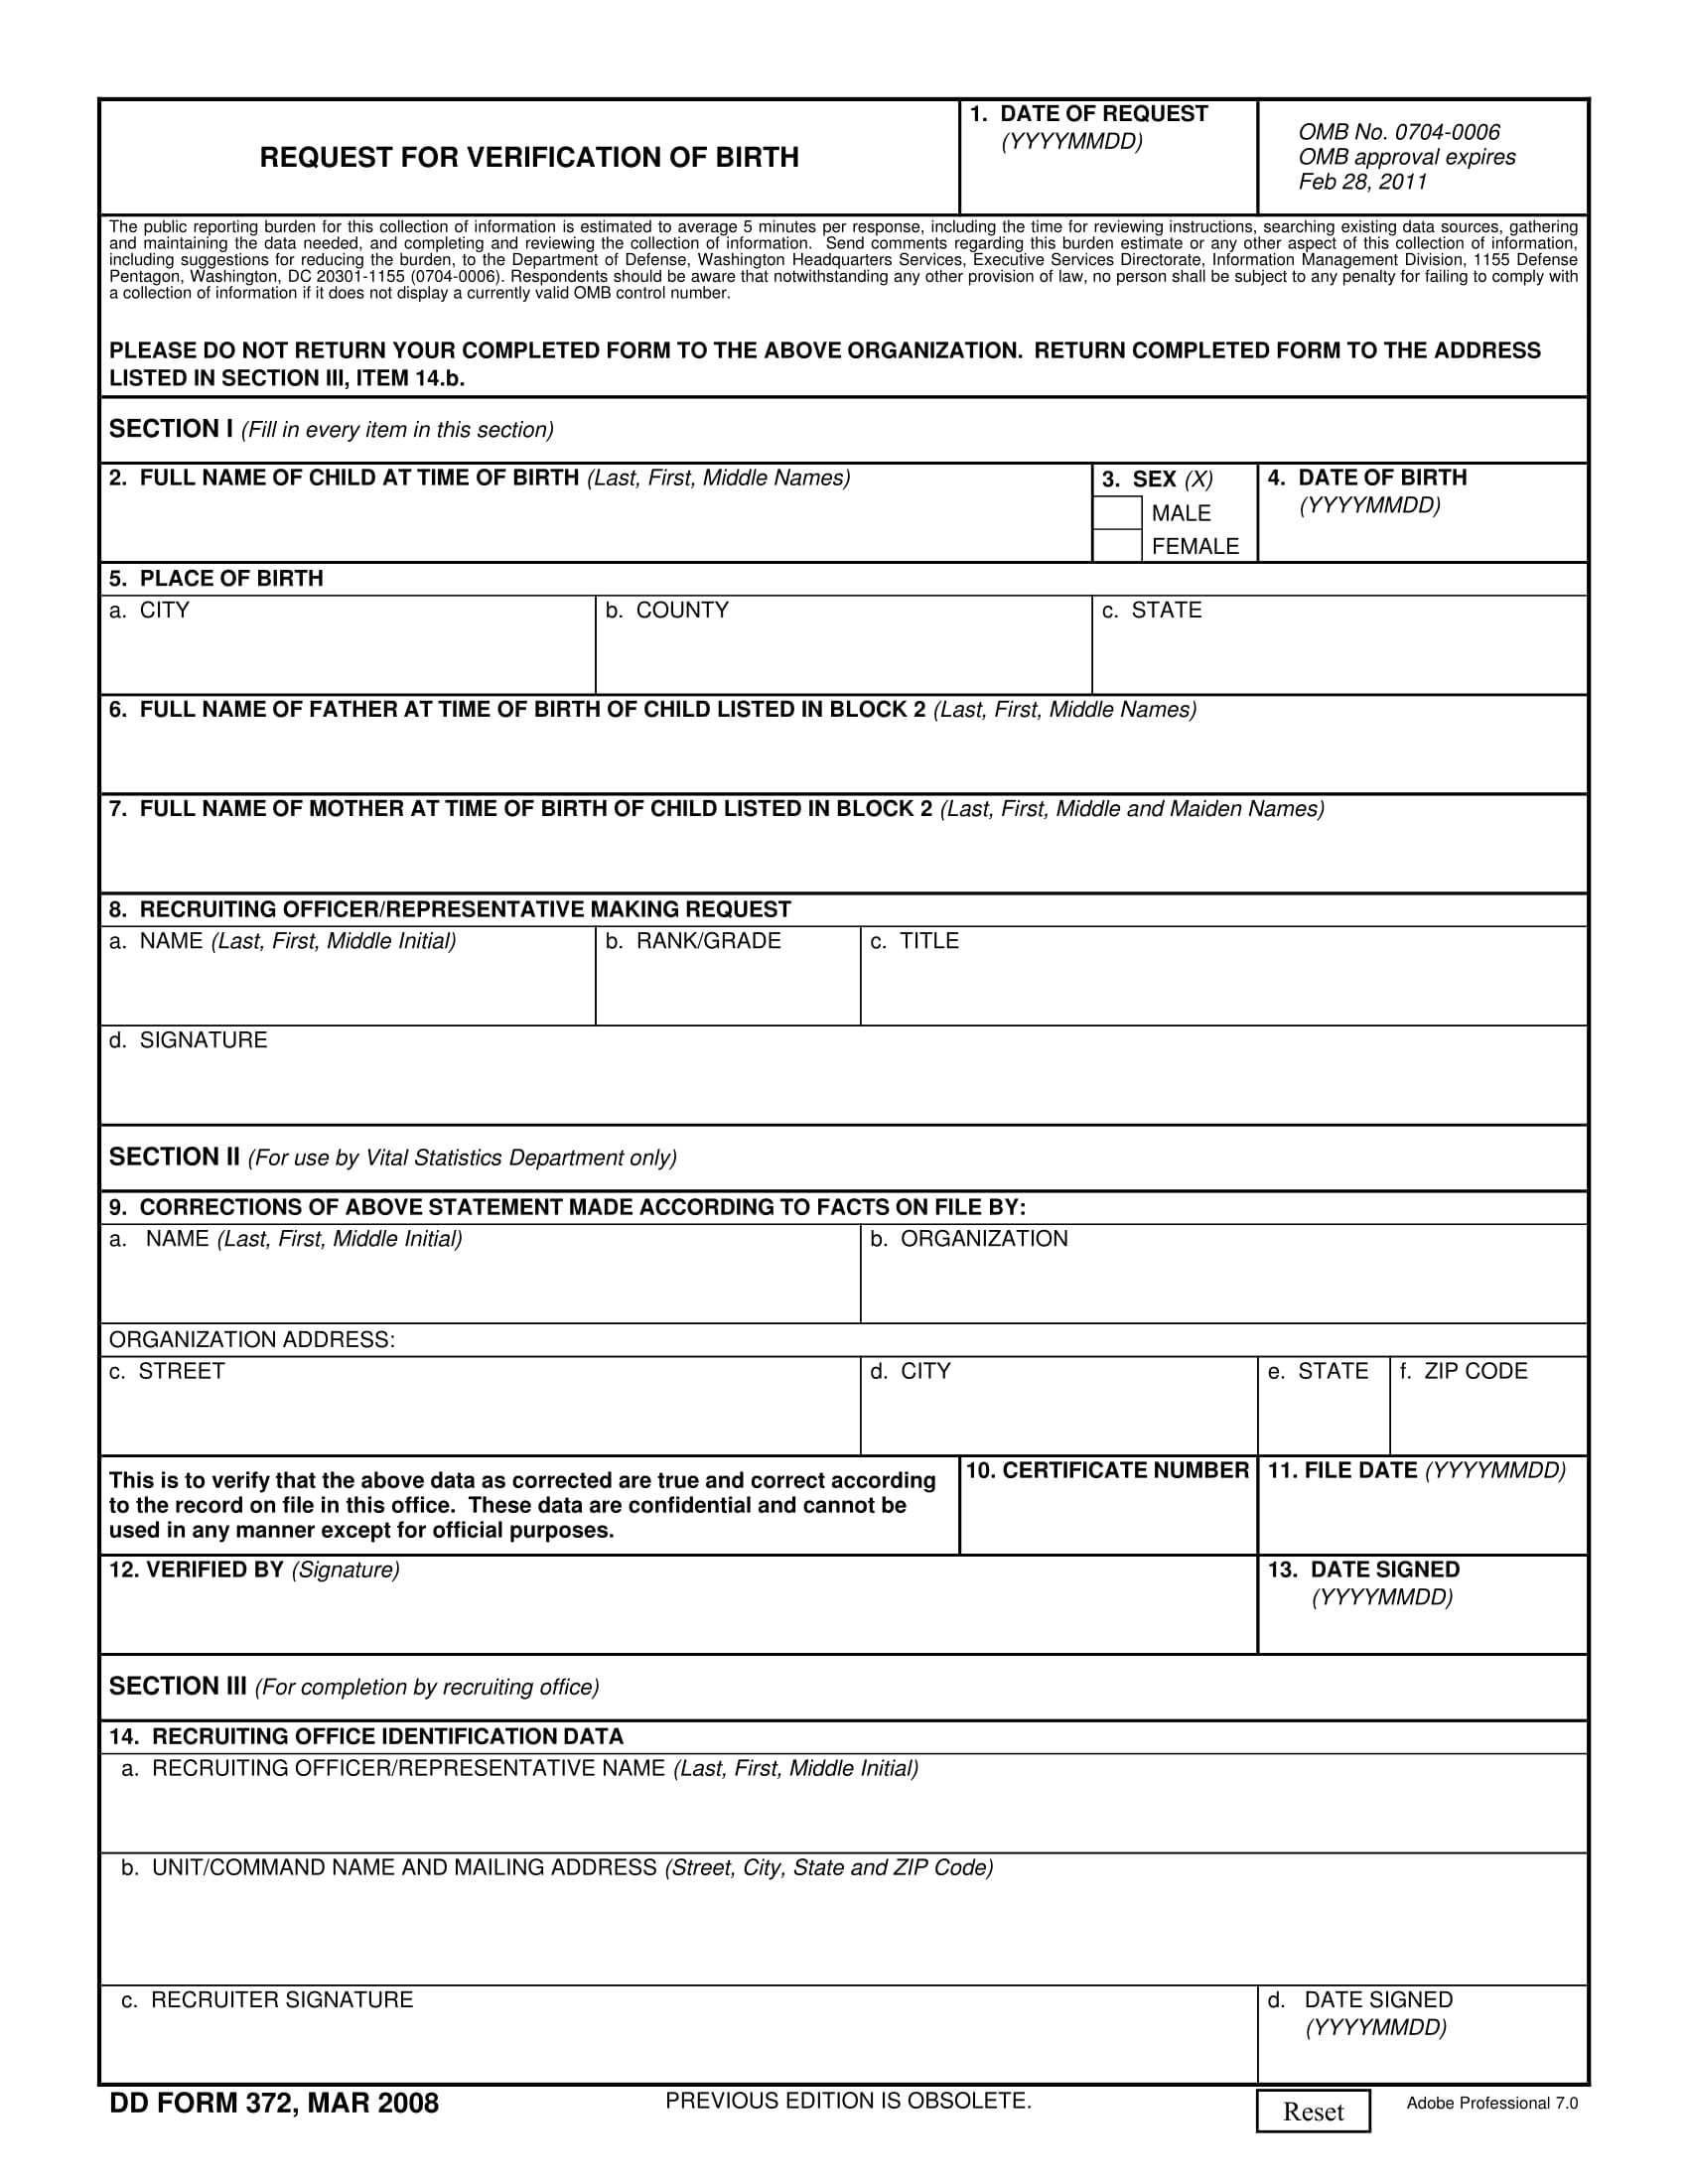 request for verification of birth form 1